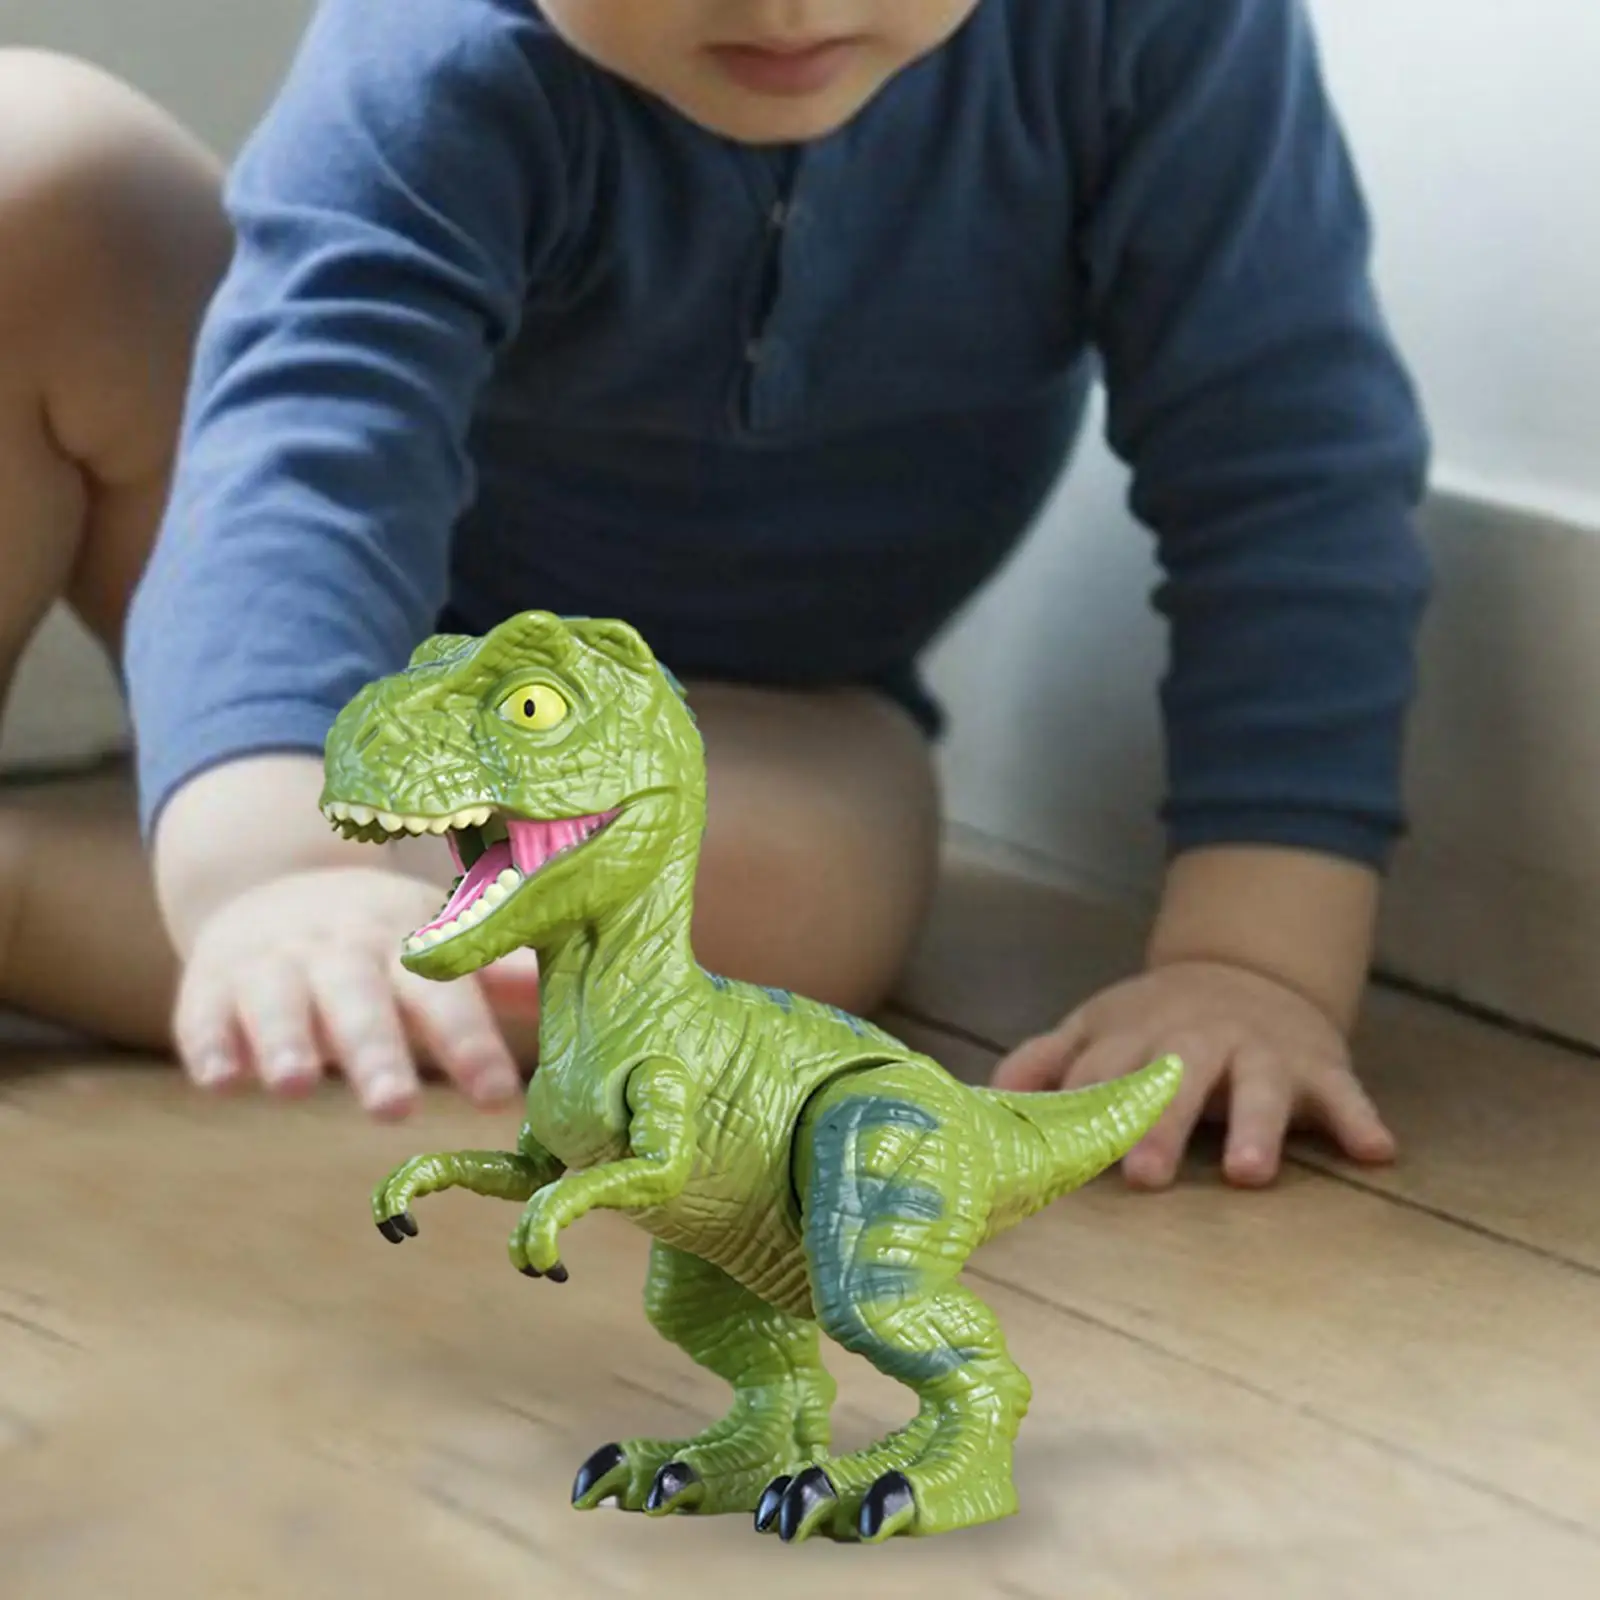 Dinosaur Action Figure Toy Movable Joints Ornament, Collectibles Animal Figurine Model Simulated Dinosaur Toy for Gift Cars